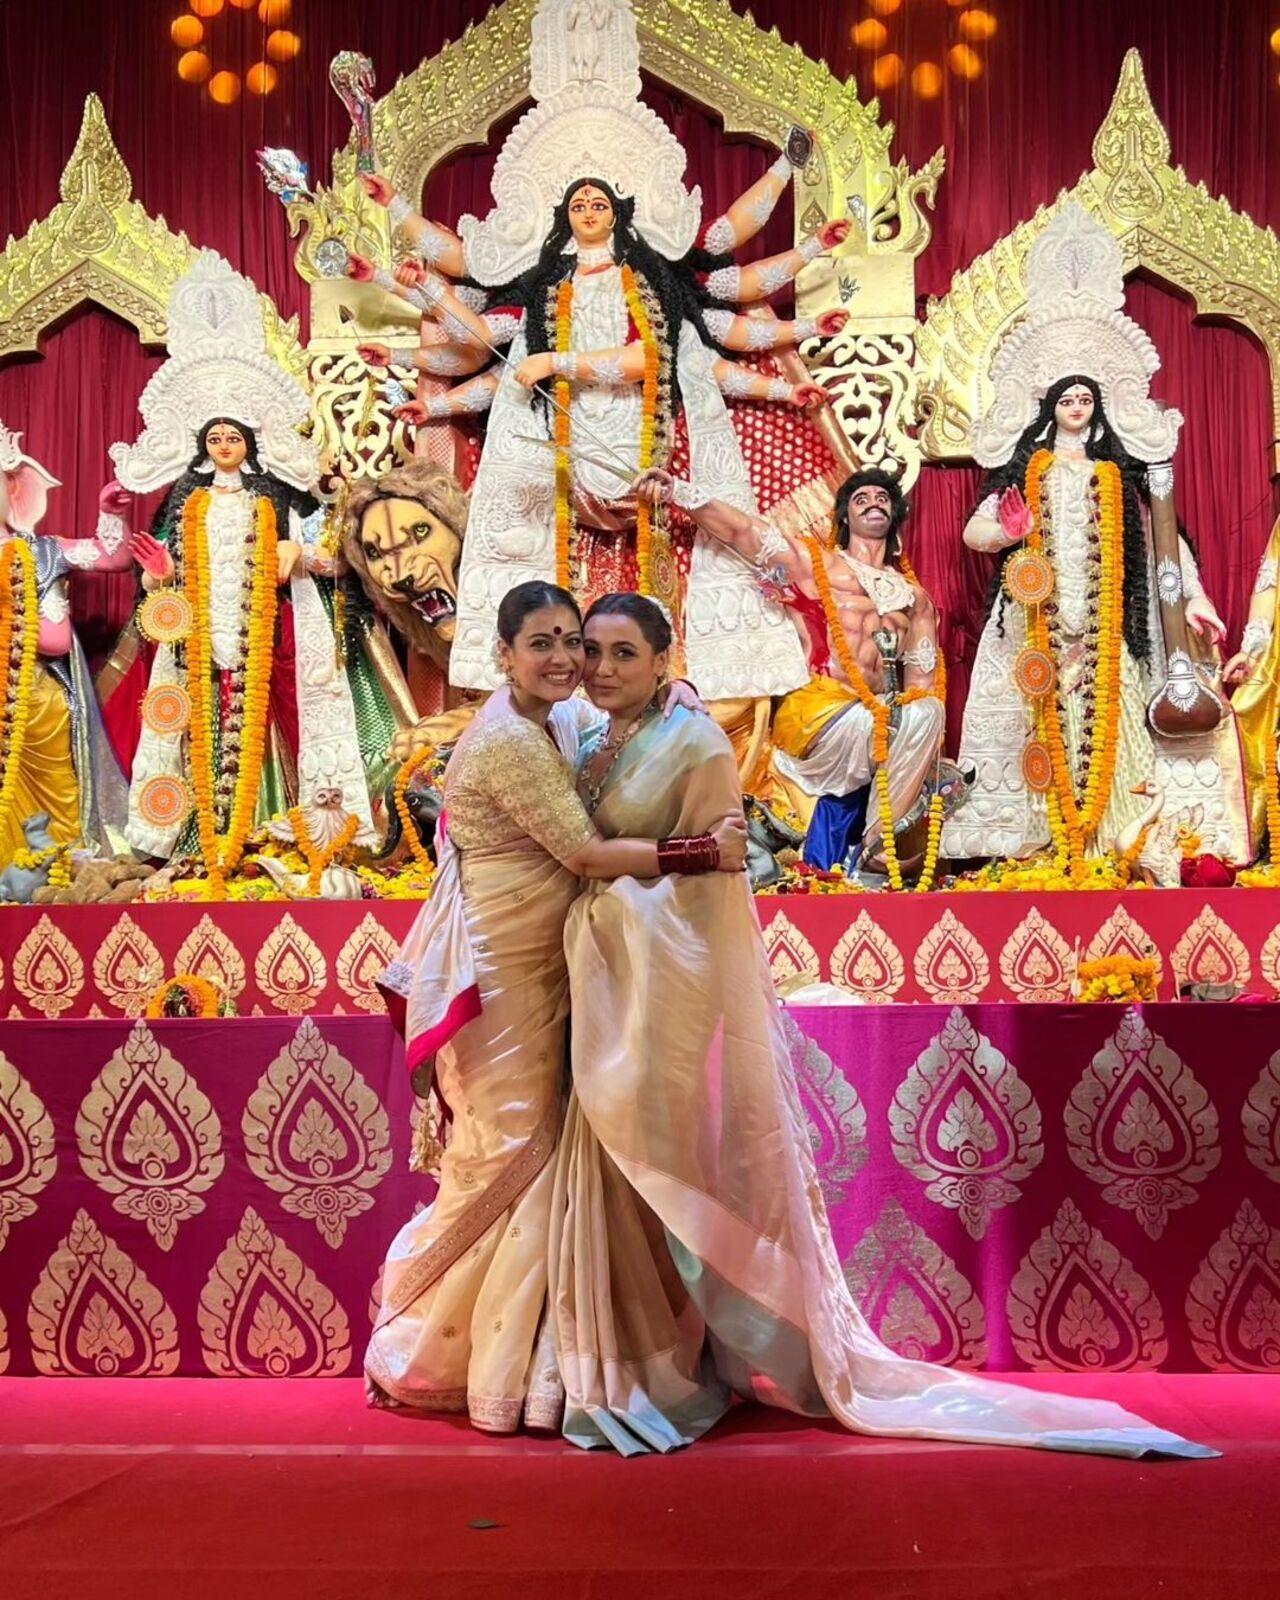 Kajol poses with her cousin actress Rani Mukerji in front of Durga maa. The cousins are regular at the pandal and take part in all festivities